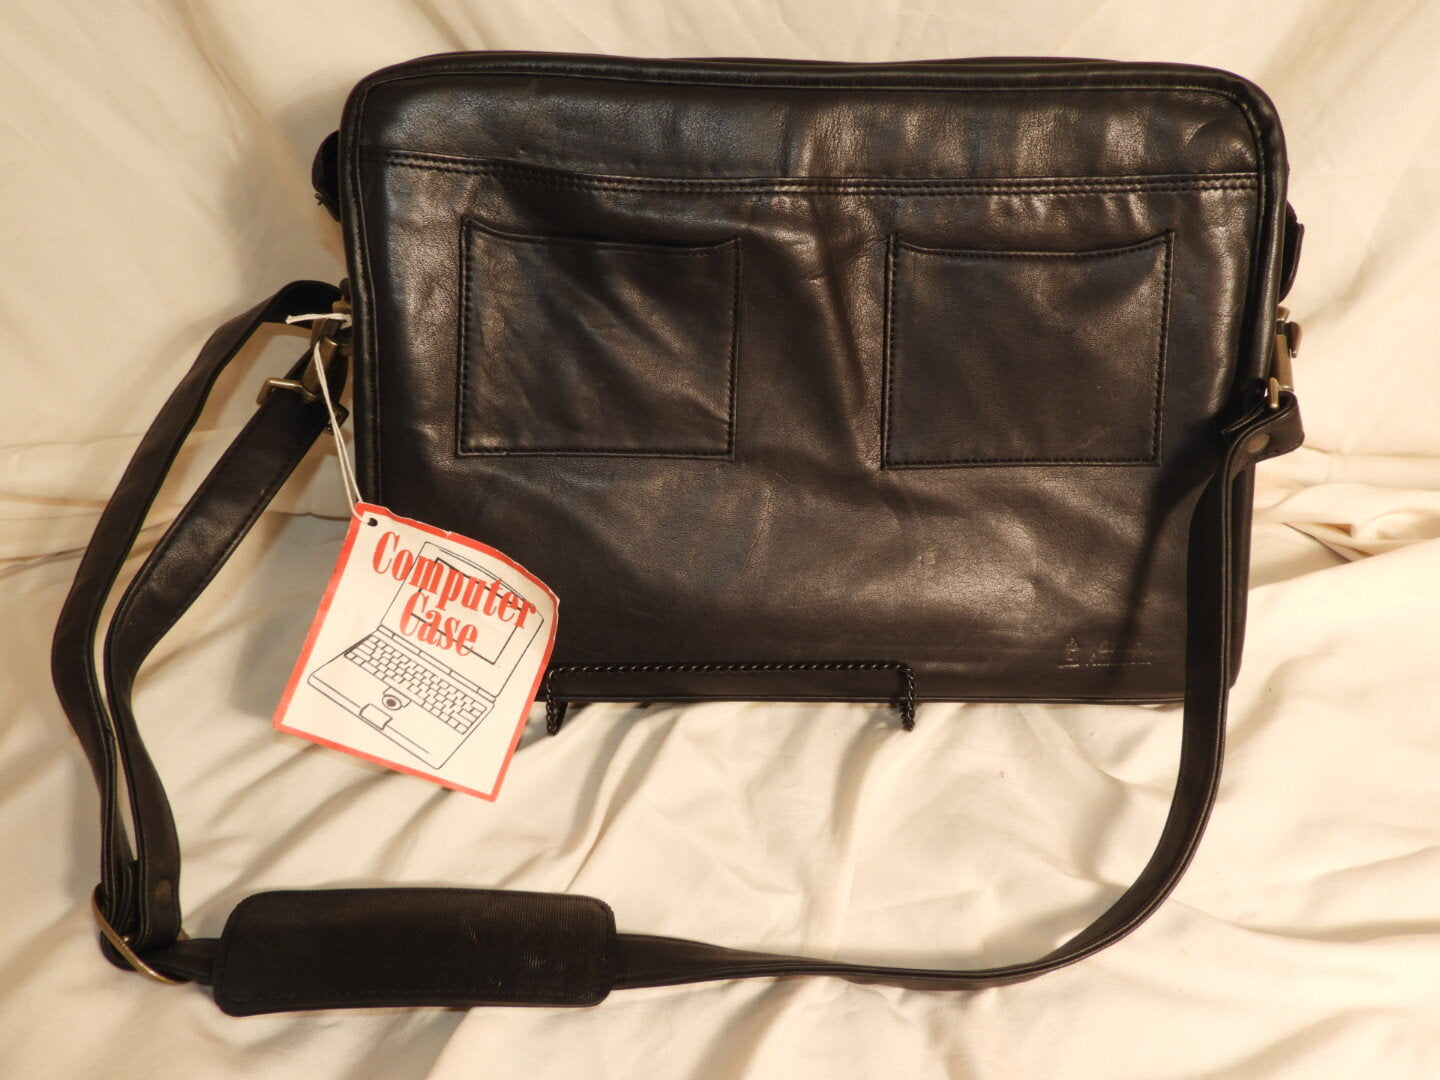 MINT CONDITION Genuine Leather Computer Bag